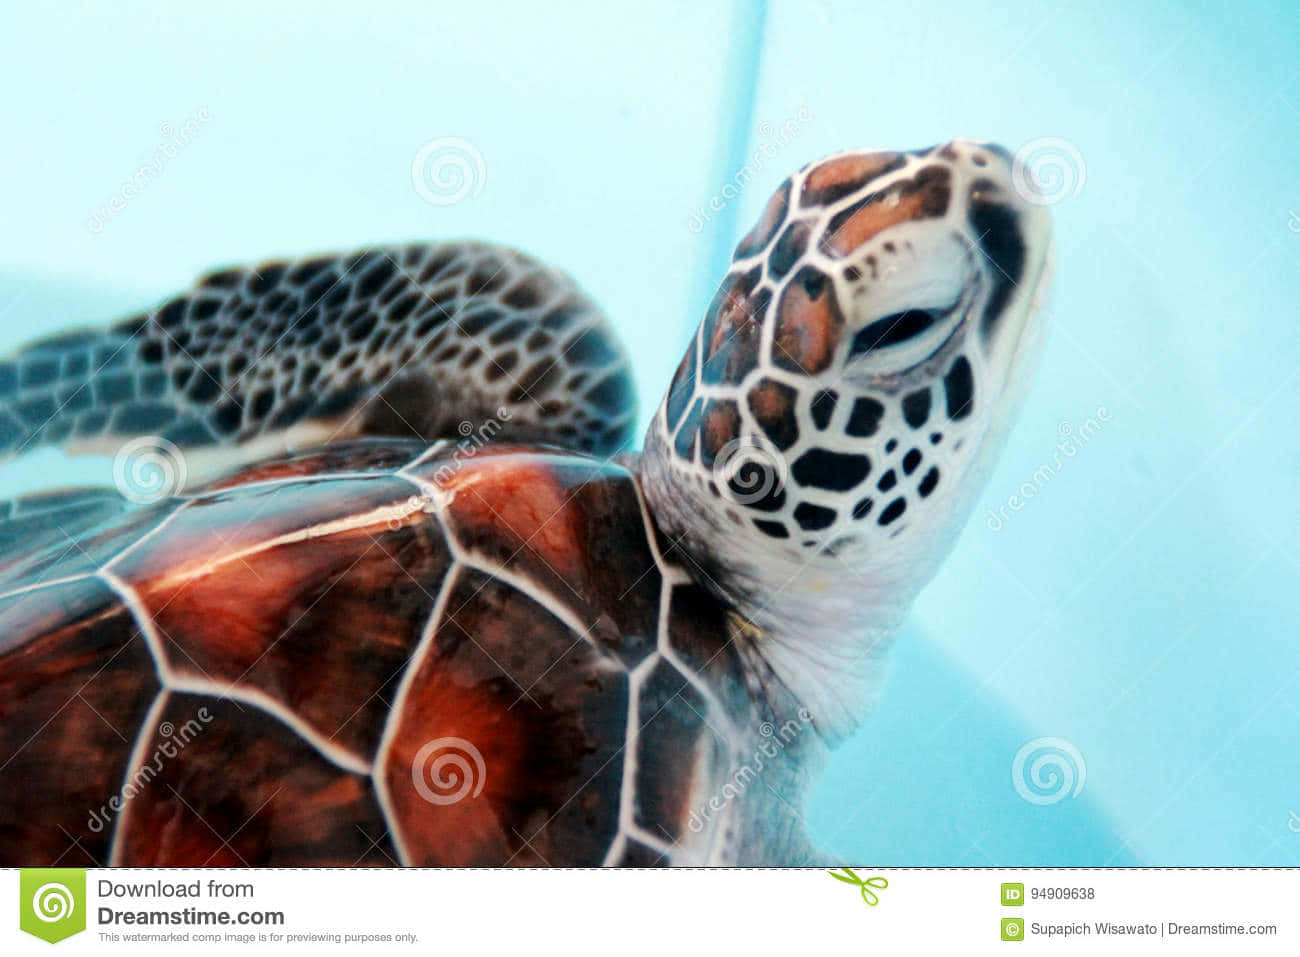 A baby turtle making its way in life Wallpaper